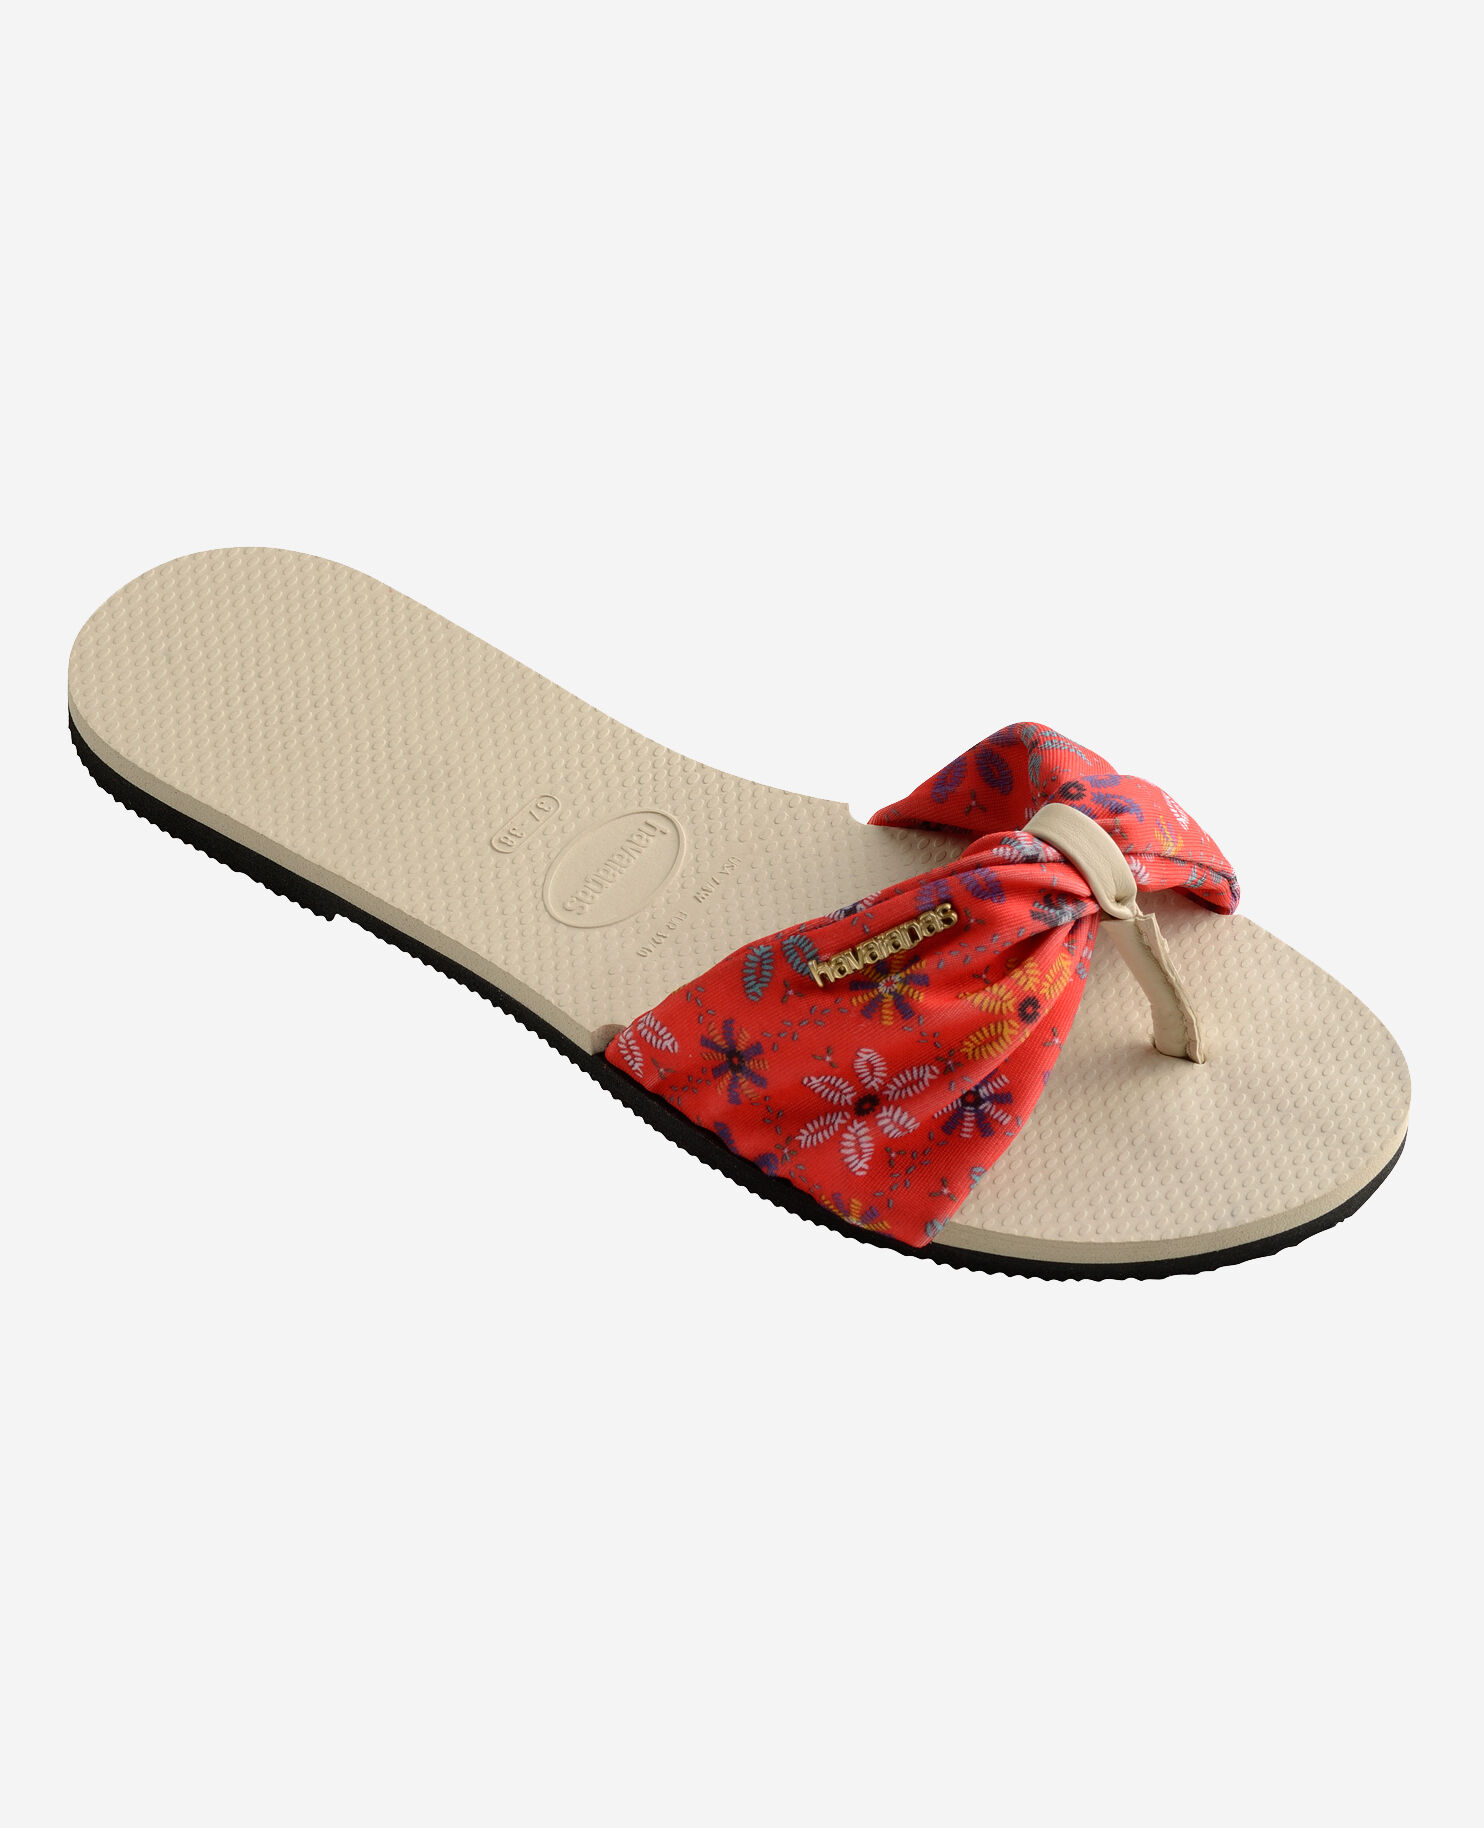 havaianas with back strap uk